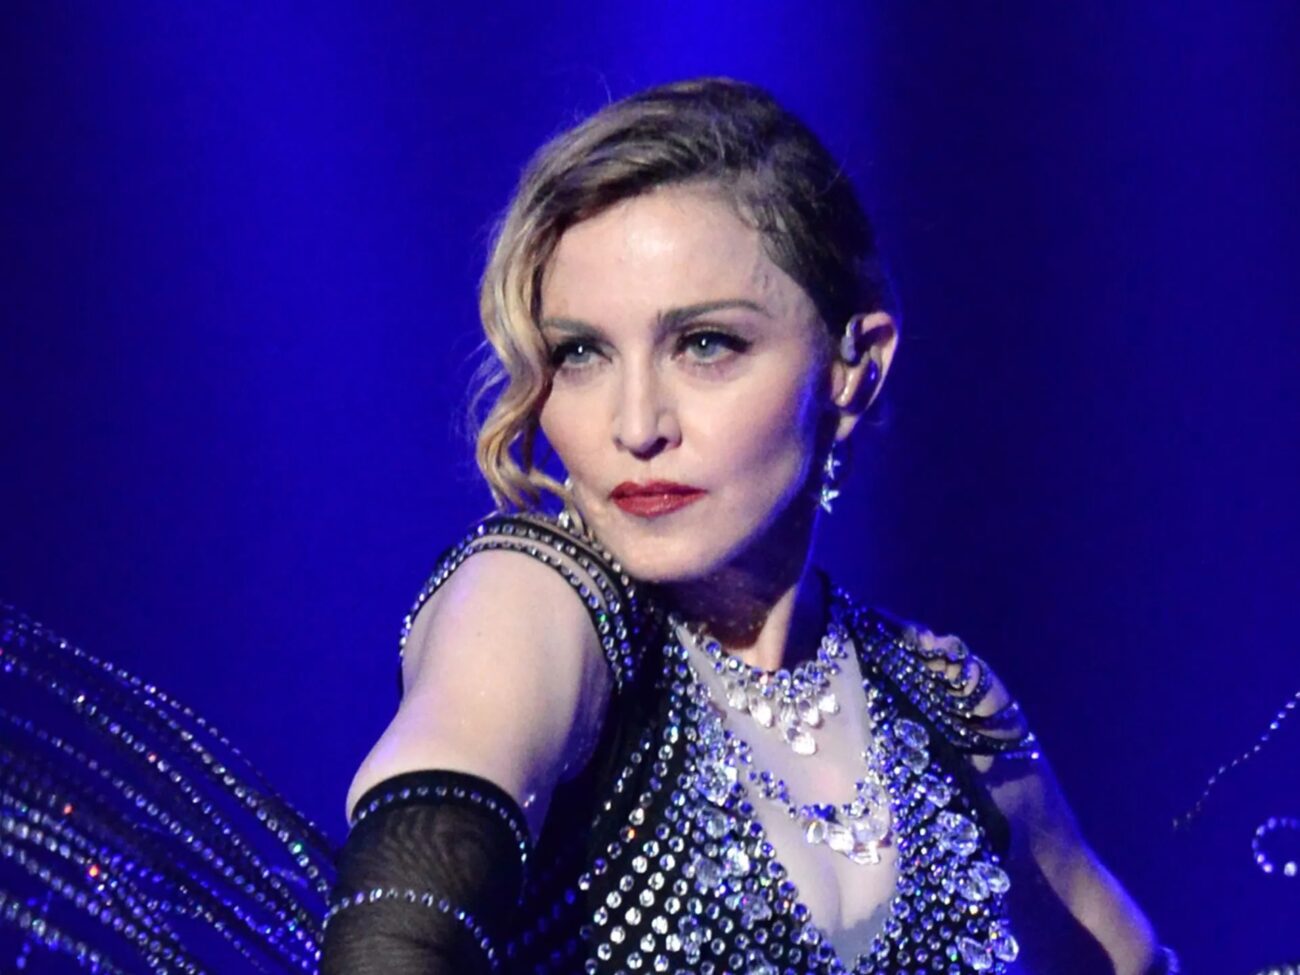 What's with the lowering age of Madonna's boyfriends? Let's take a closer look at the history of lovers in her life.